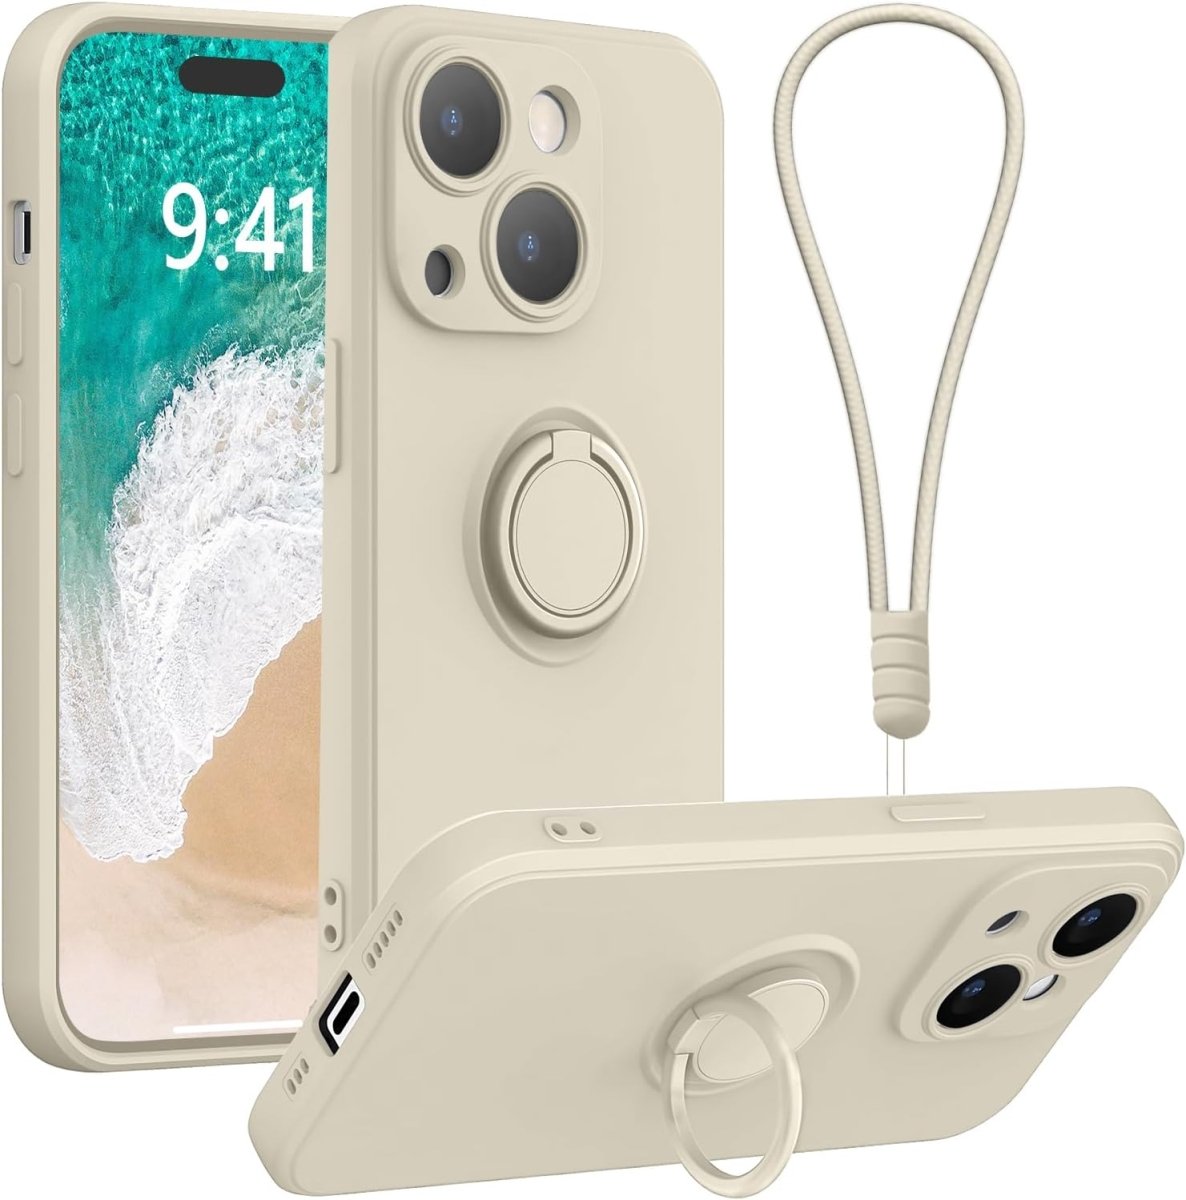 Starlight Shockproof Silicone Case For iPhone With Ring And Lanyard  Starlight iPhone 11 Accessories Gifts UK